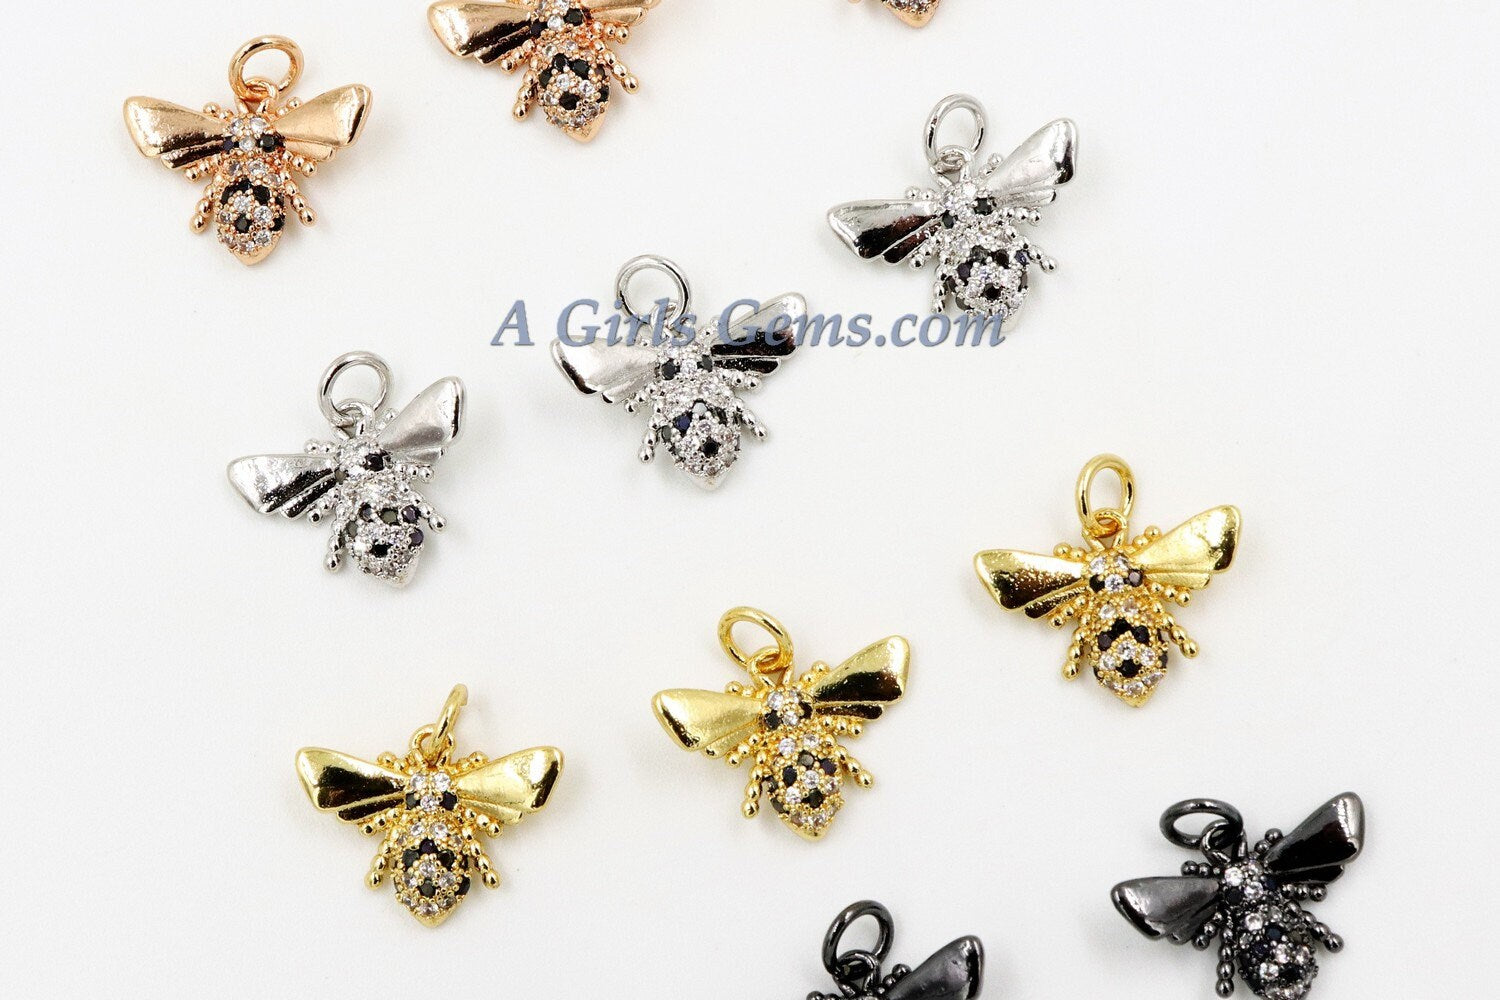 CZ Micro Pave Bee Charms, Tiny Bumble Bee Bracelet Charms Gold/Rose Gold/Black/Silver Insect/Queen/Mary Kay, 11 mm x 15 mm Honey Bee Jewelry